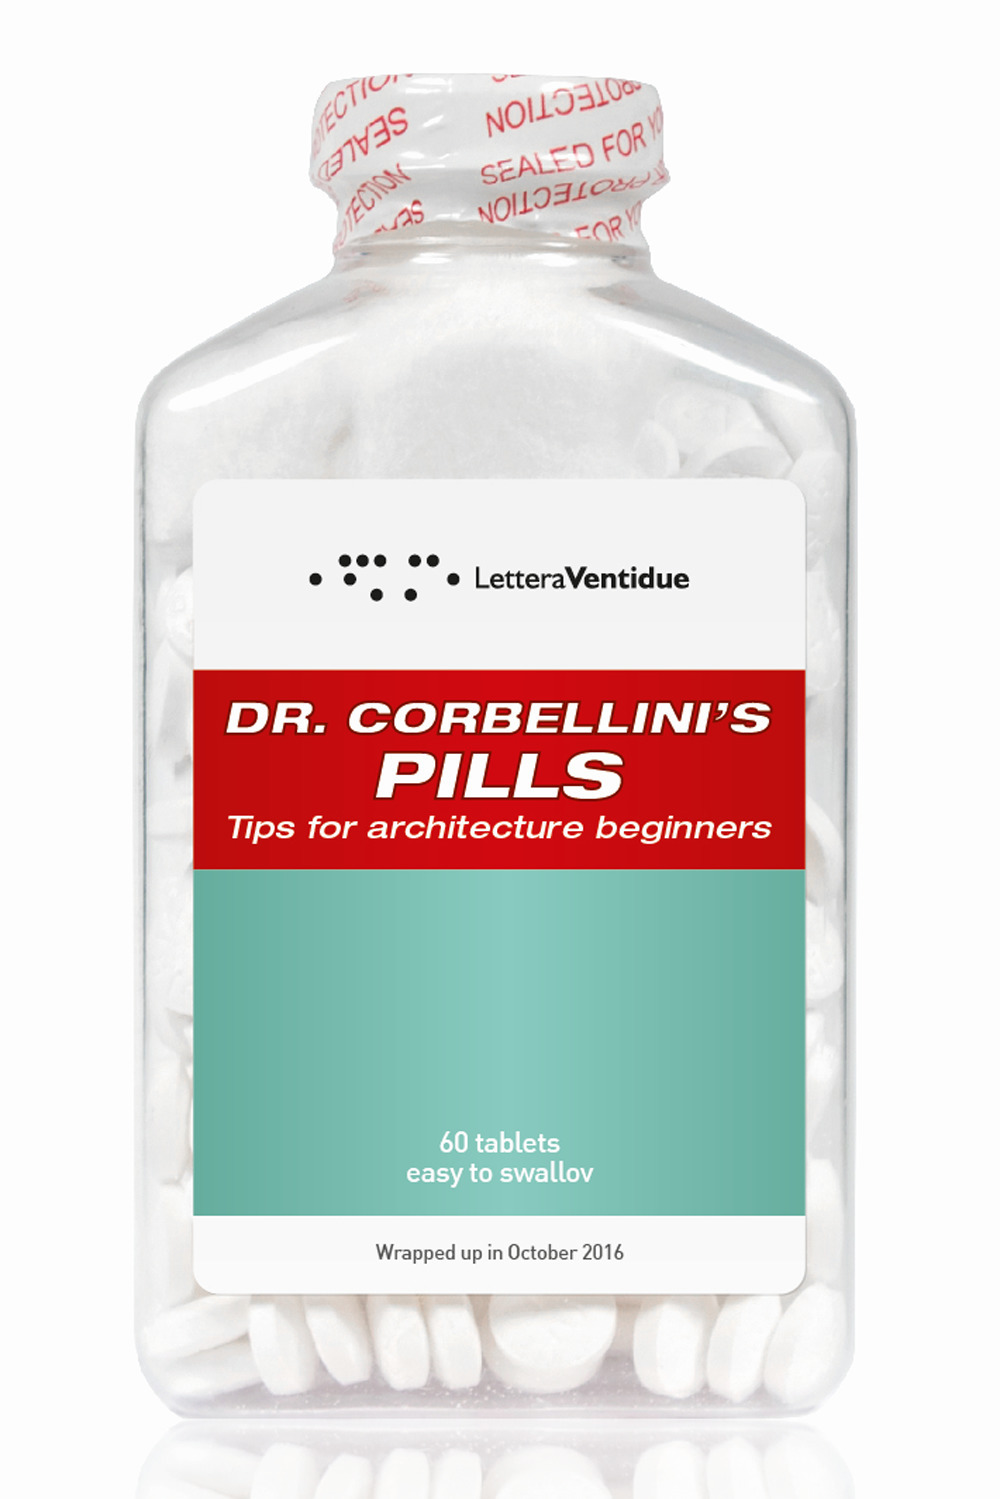 Dr. Corbellini's pills. Tips for architecture beginners